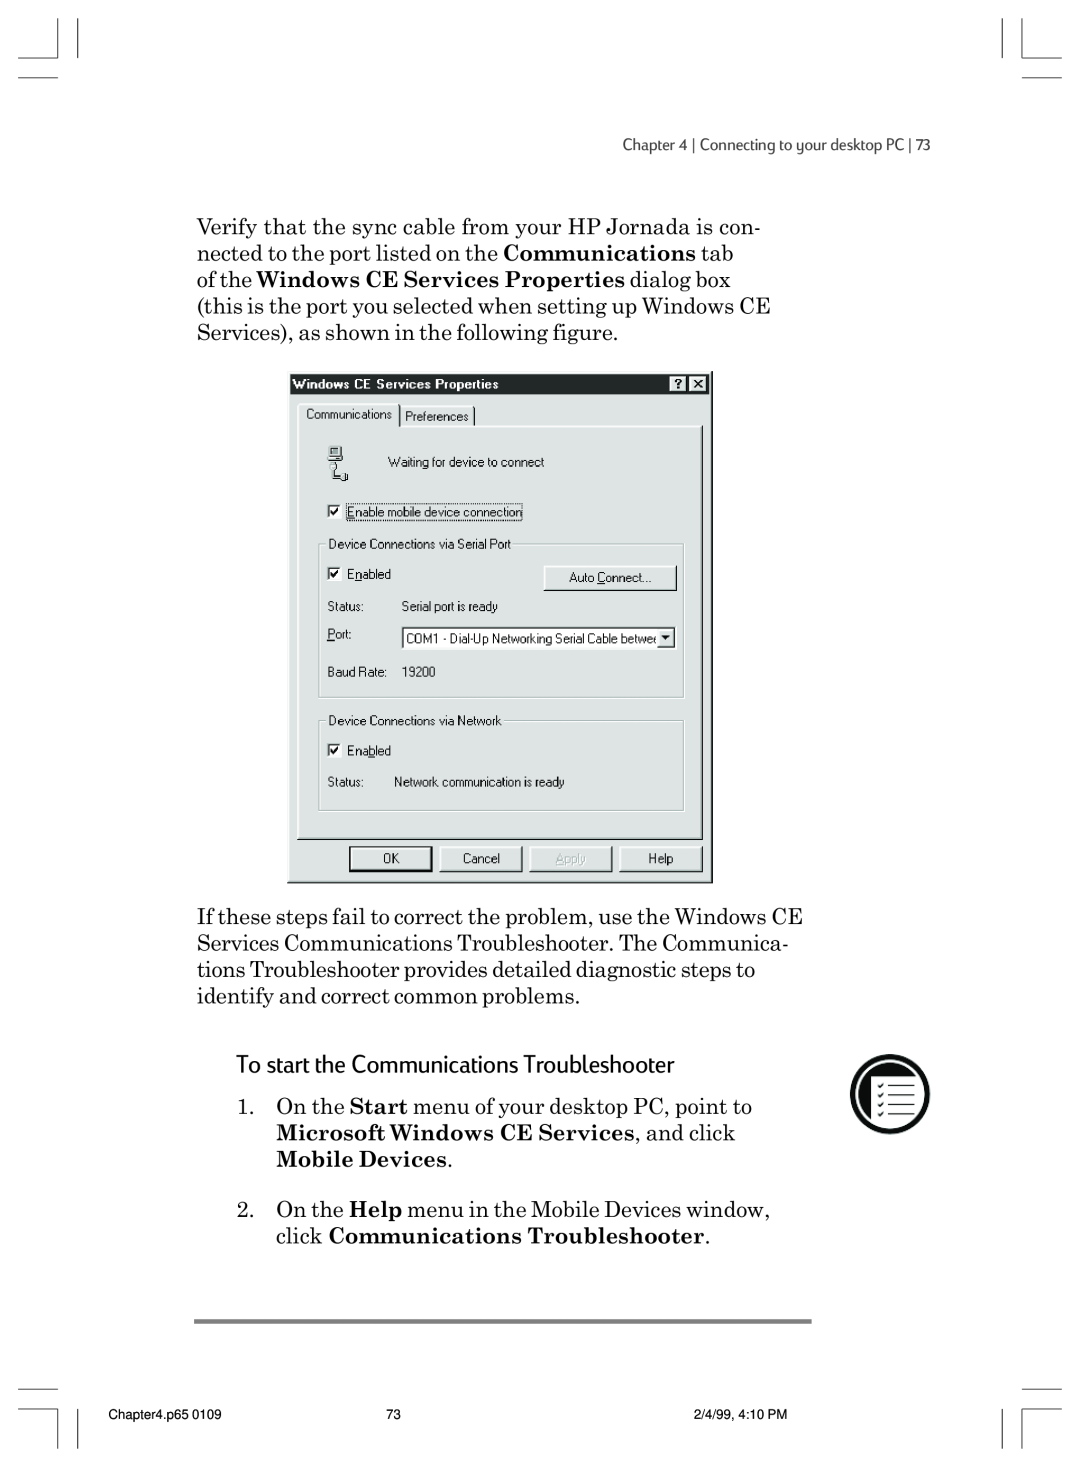 HP 820 E manual To start the Communications Troubleshooter 